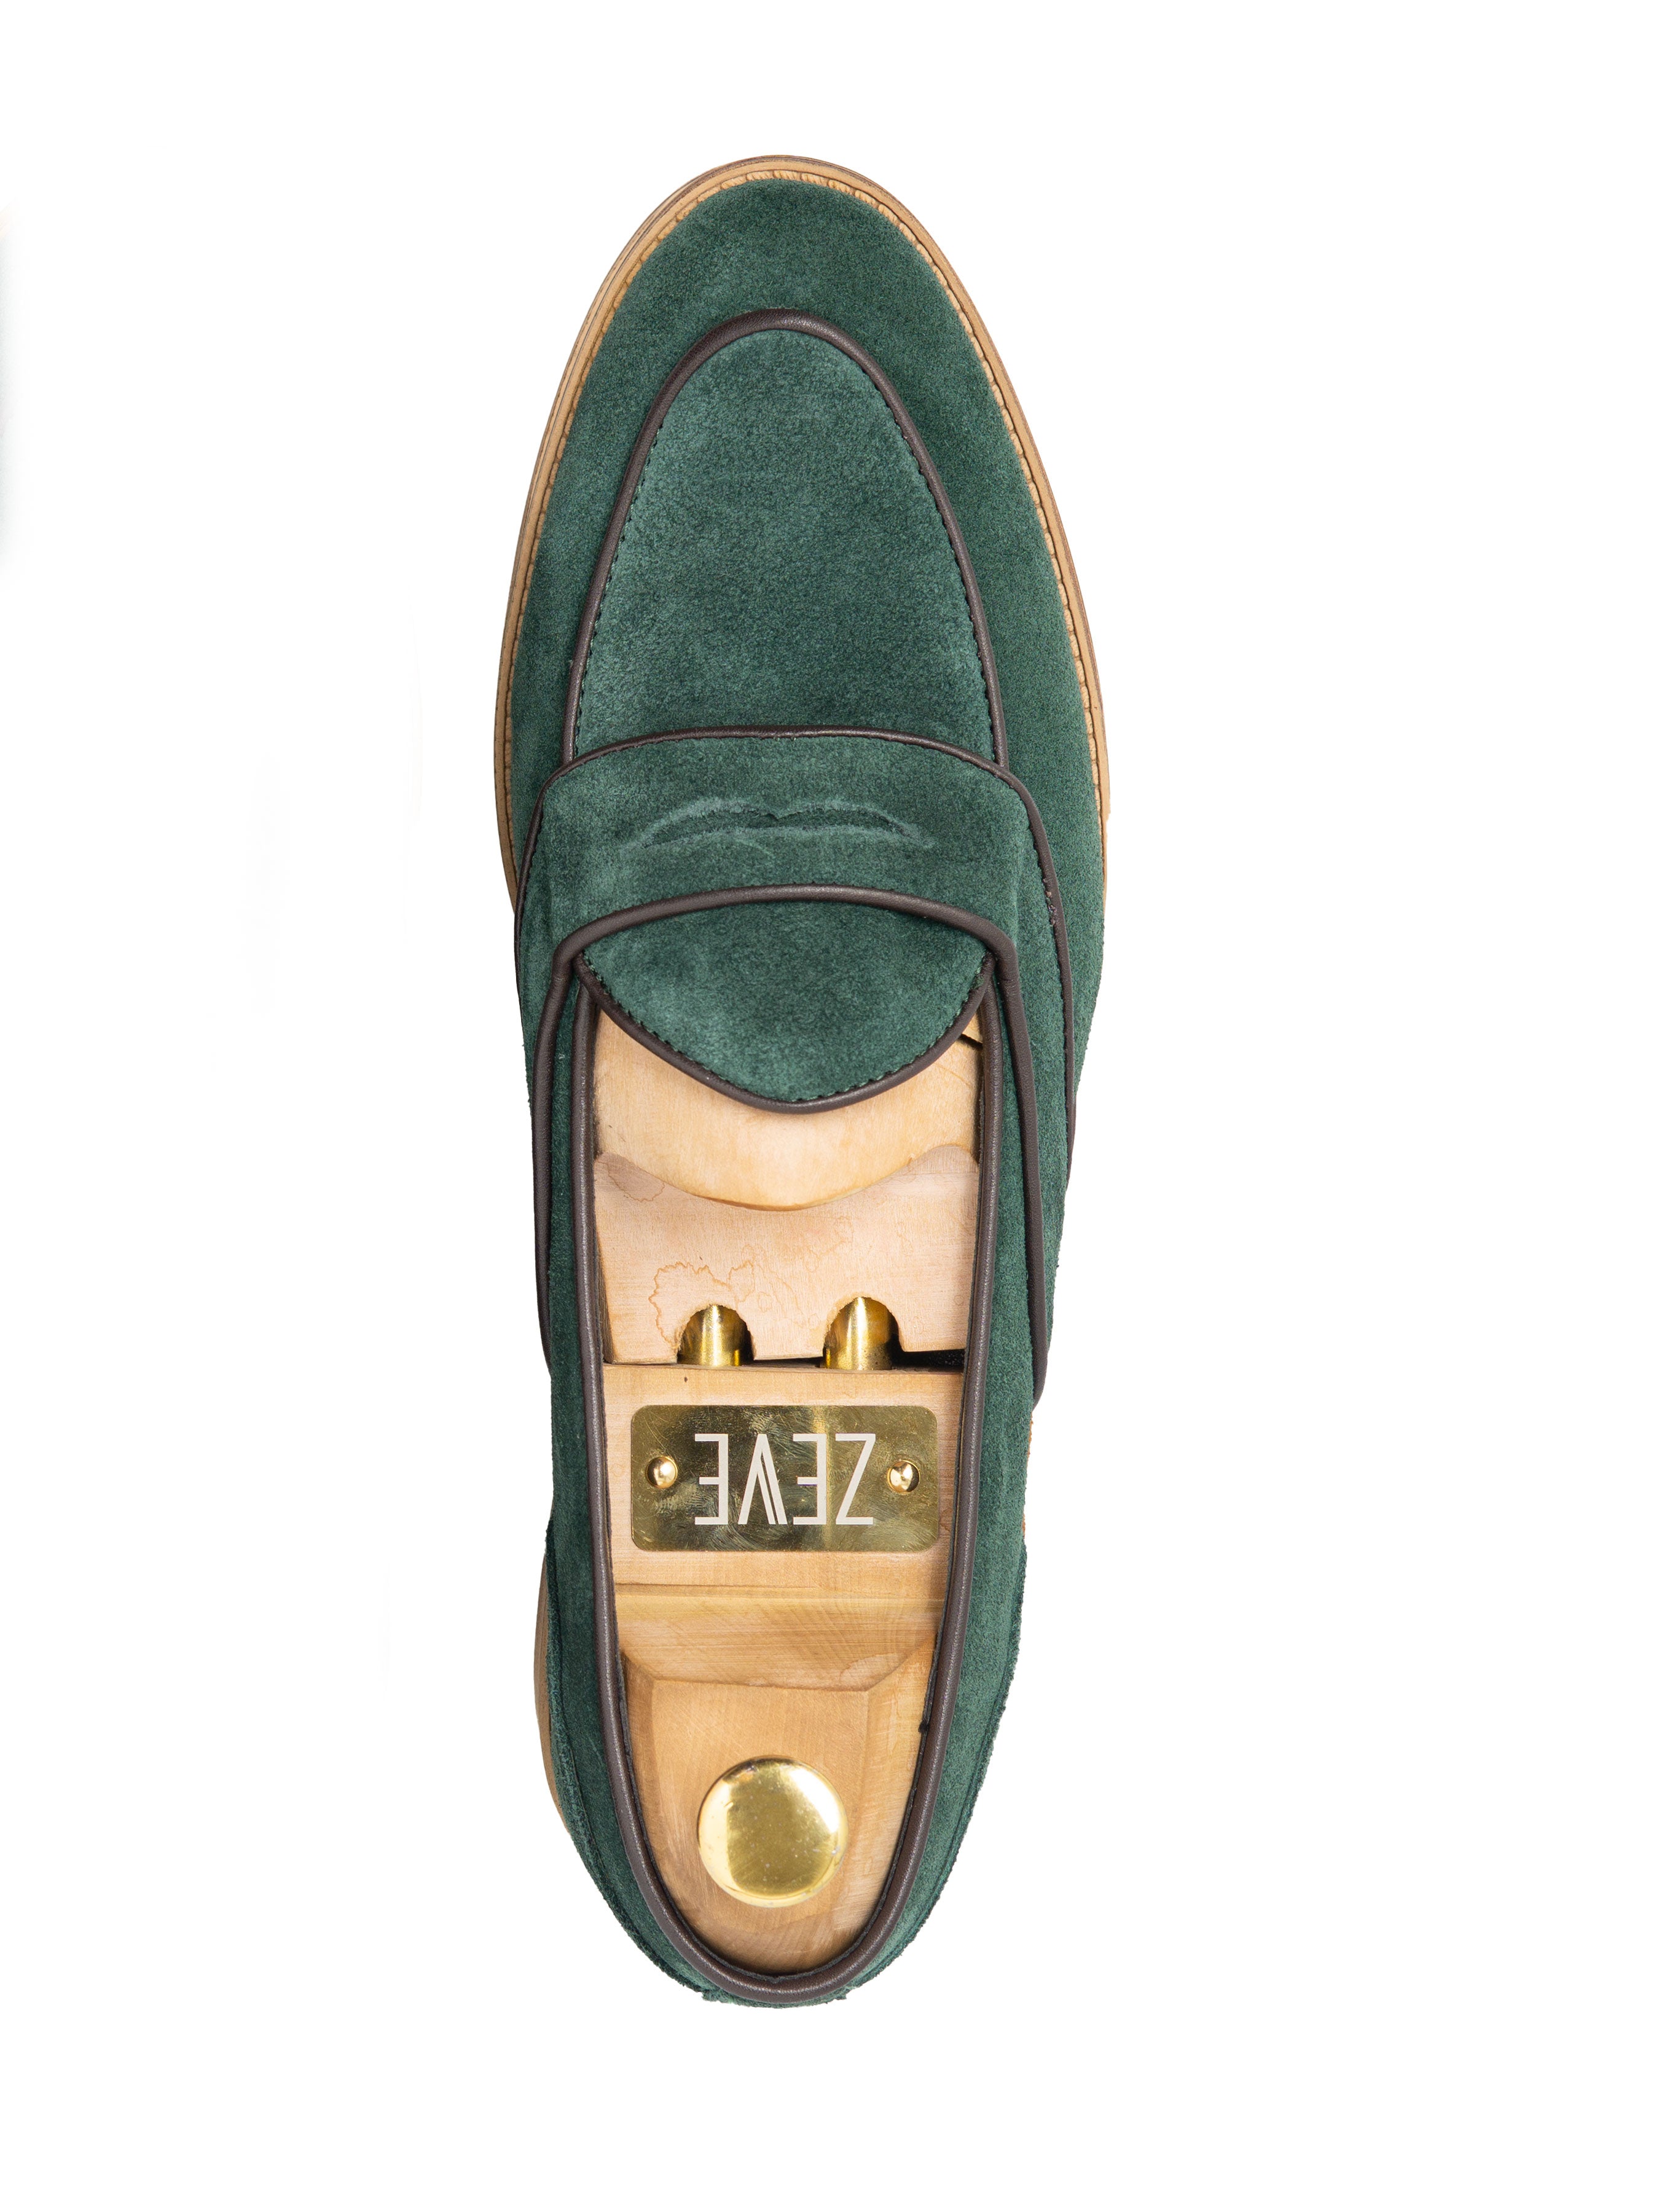 Belgian Loafer - Emerald Green Suede Leather With Penny Strap Piping (Flexi-Sole) - Zeve Shoes